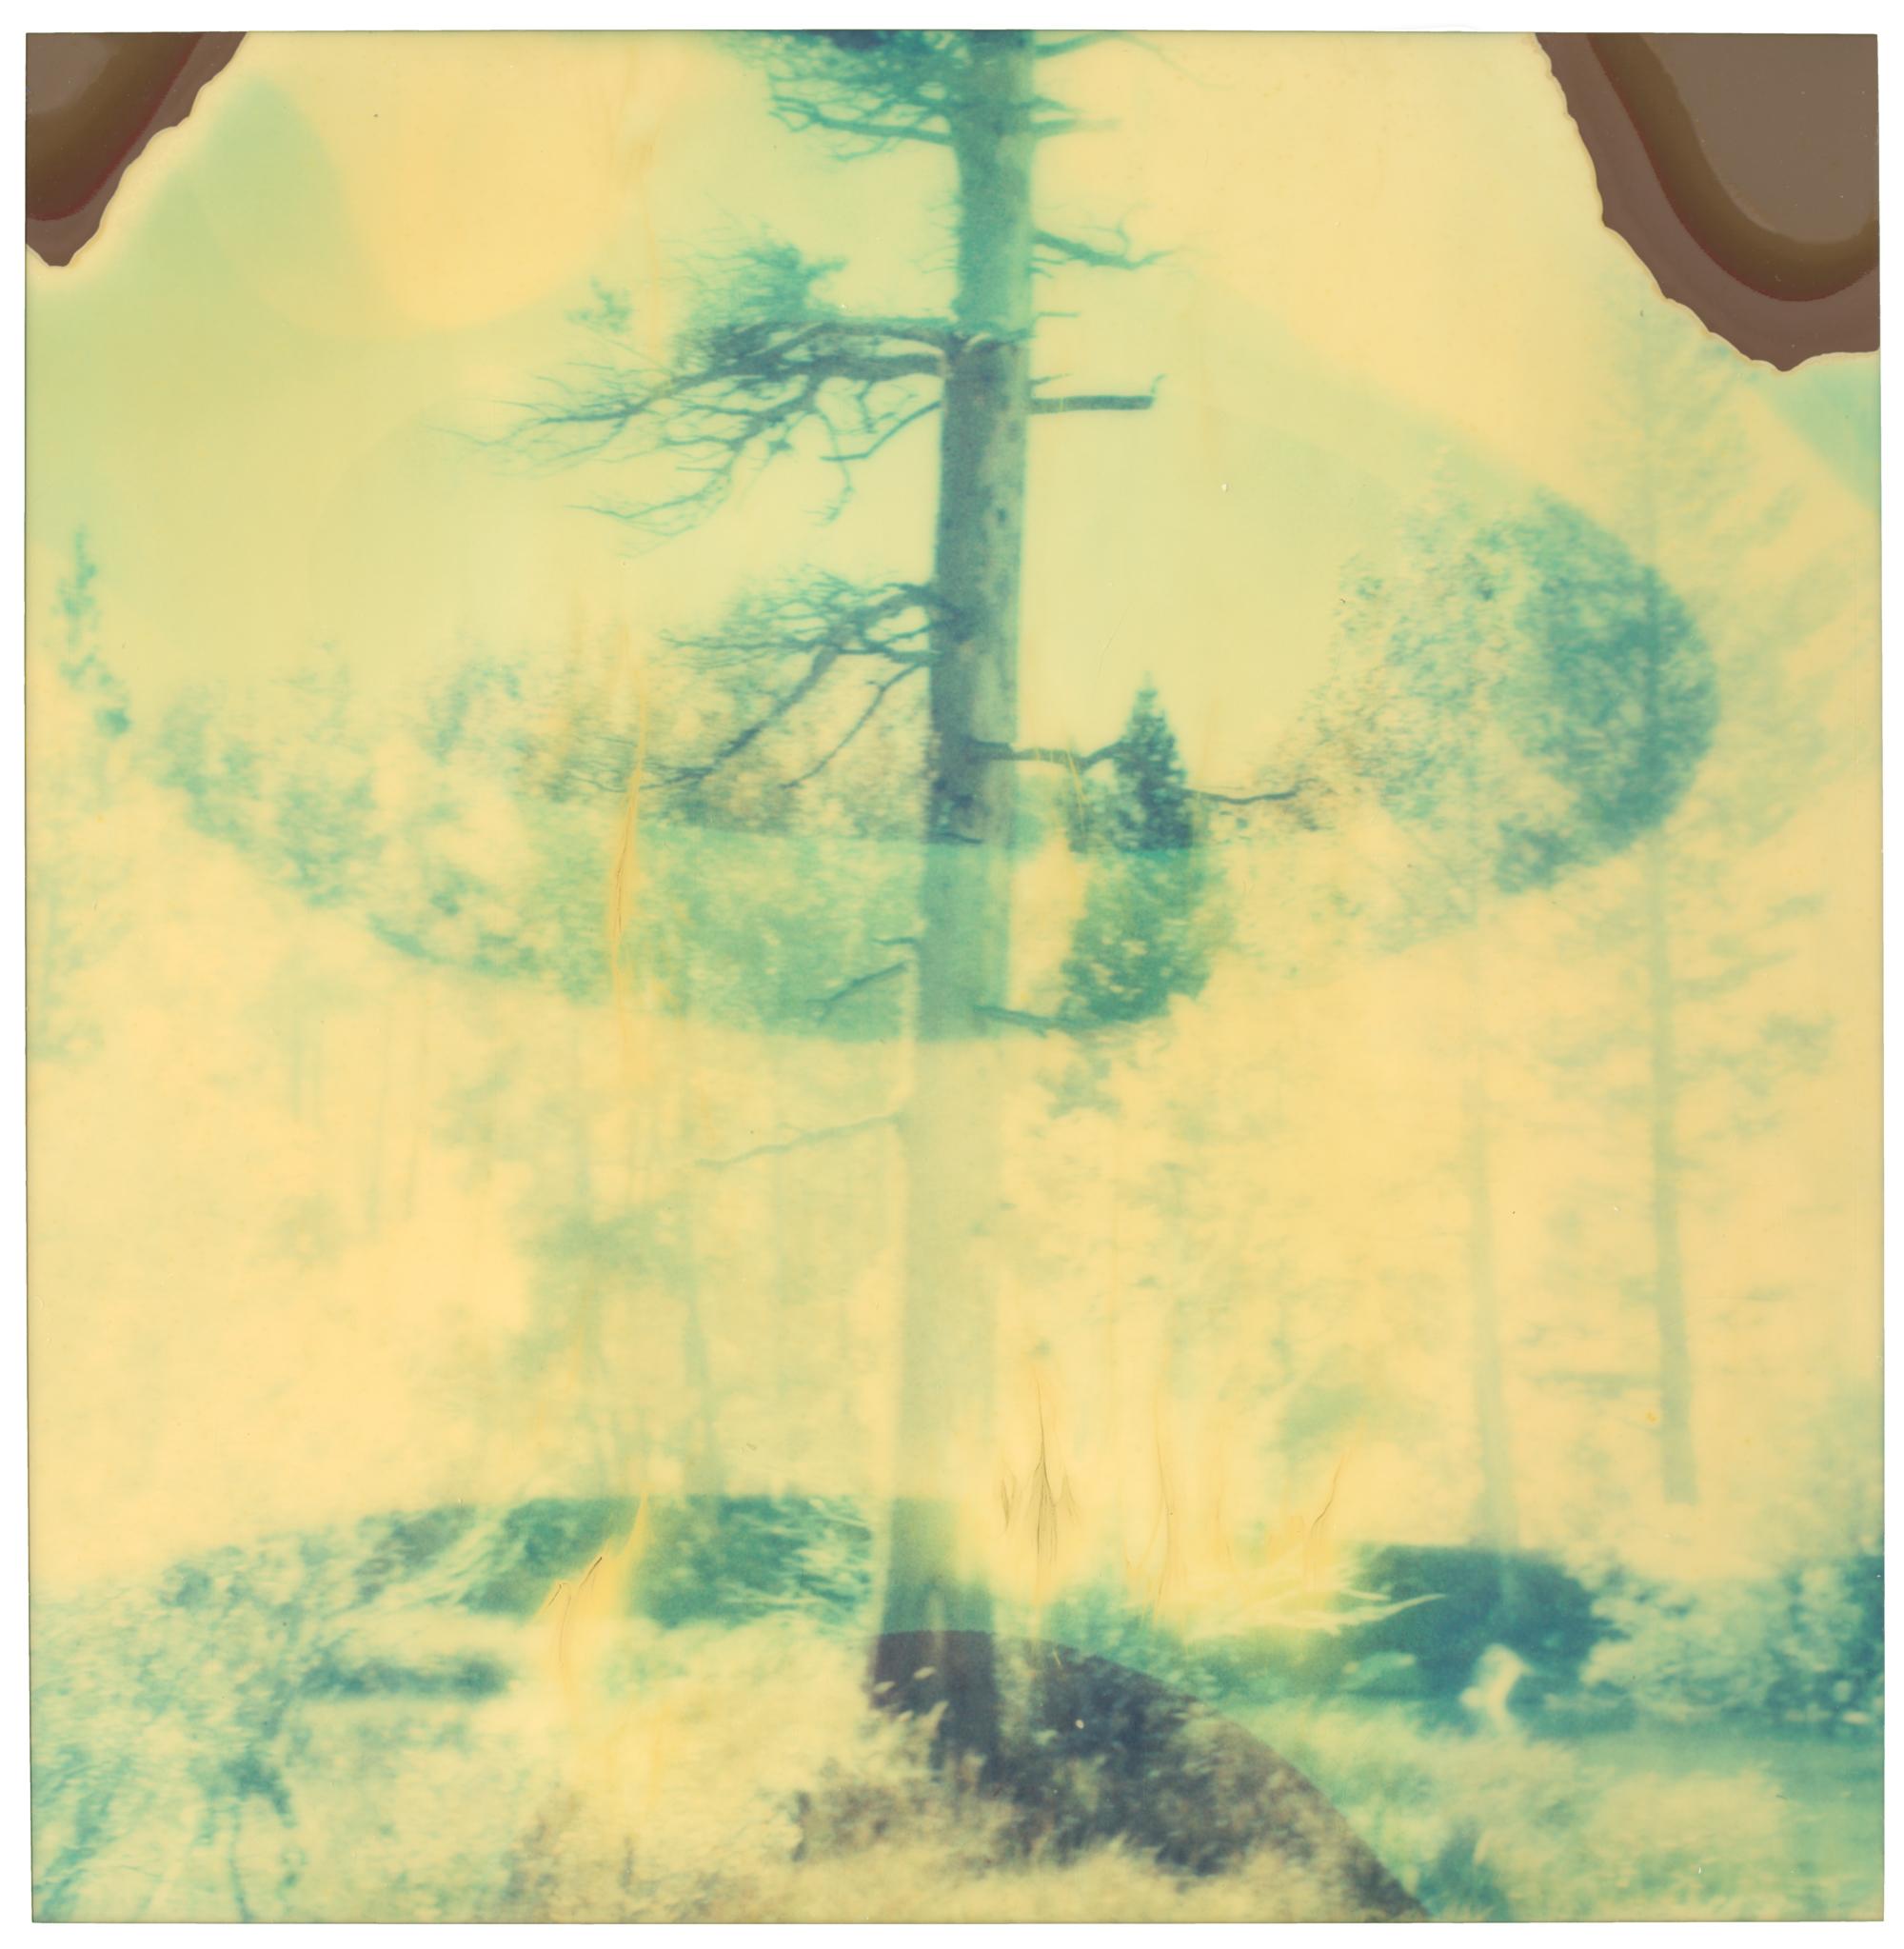 Stefanie Schneider Color Photograph - In the Range of Light II (Wastelands) - Polaroid, Expired. Contemporary, Color